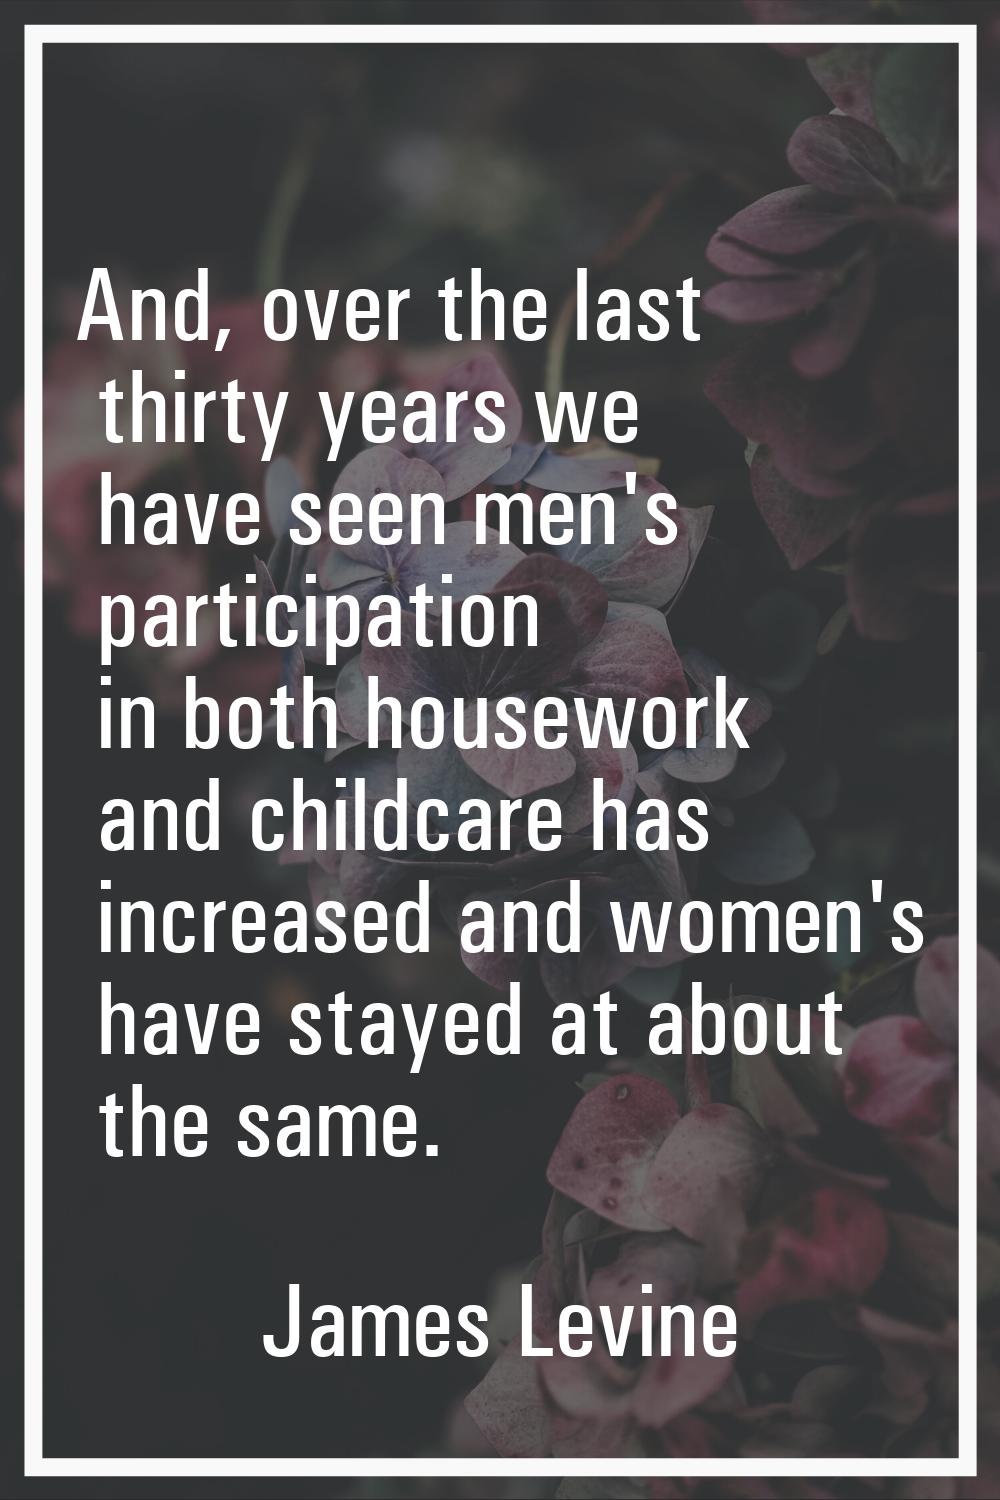 And, over the last thirty years we have seen men's participation in both housework and childcare ha